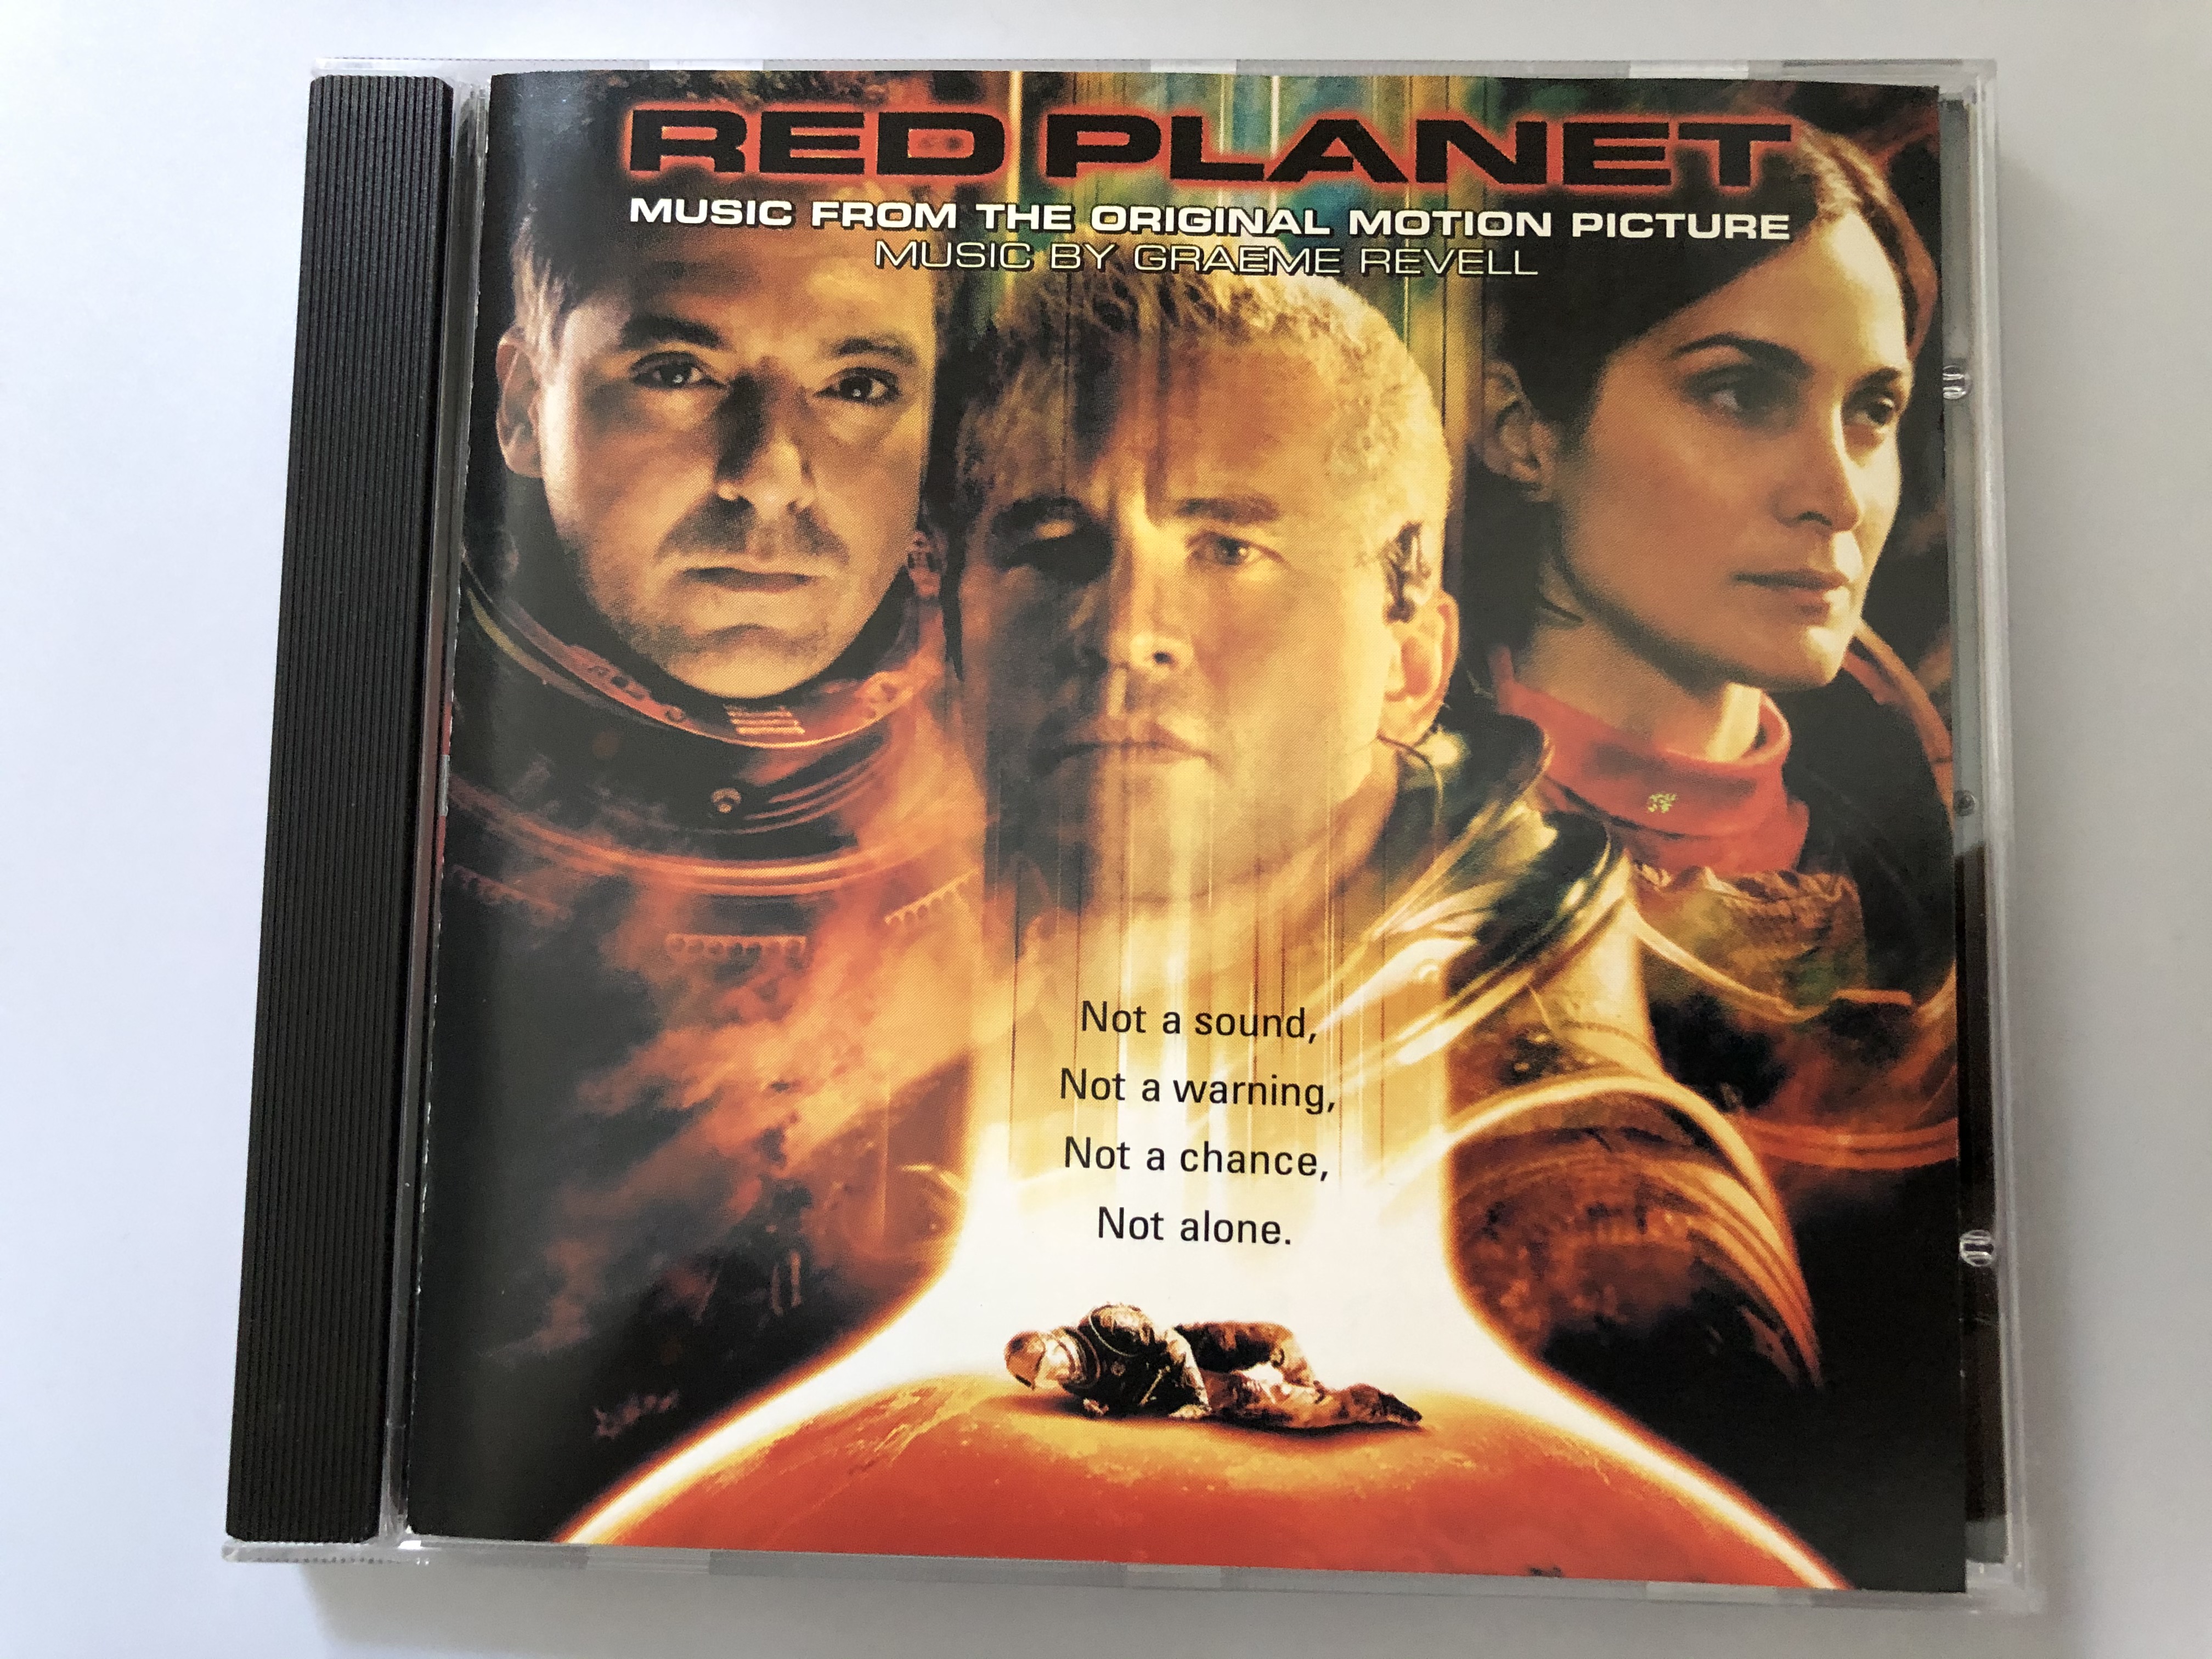 red-planet-music-from-the-original-motion-picture-music-by-graeme-revell-not-a-sound-not-a-warning-not-a-chance-not-alone.-pang-a-audio-cd-2000-520-055-2-1-.jpg